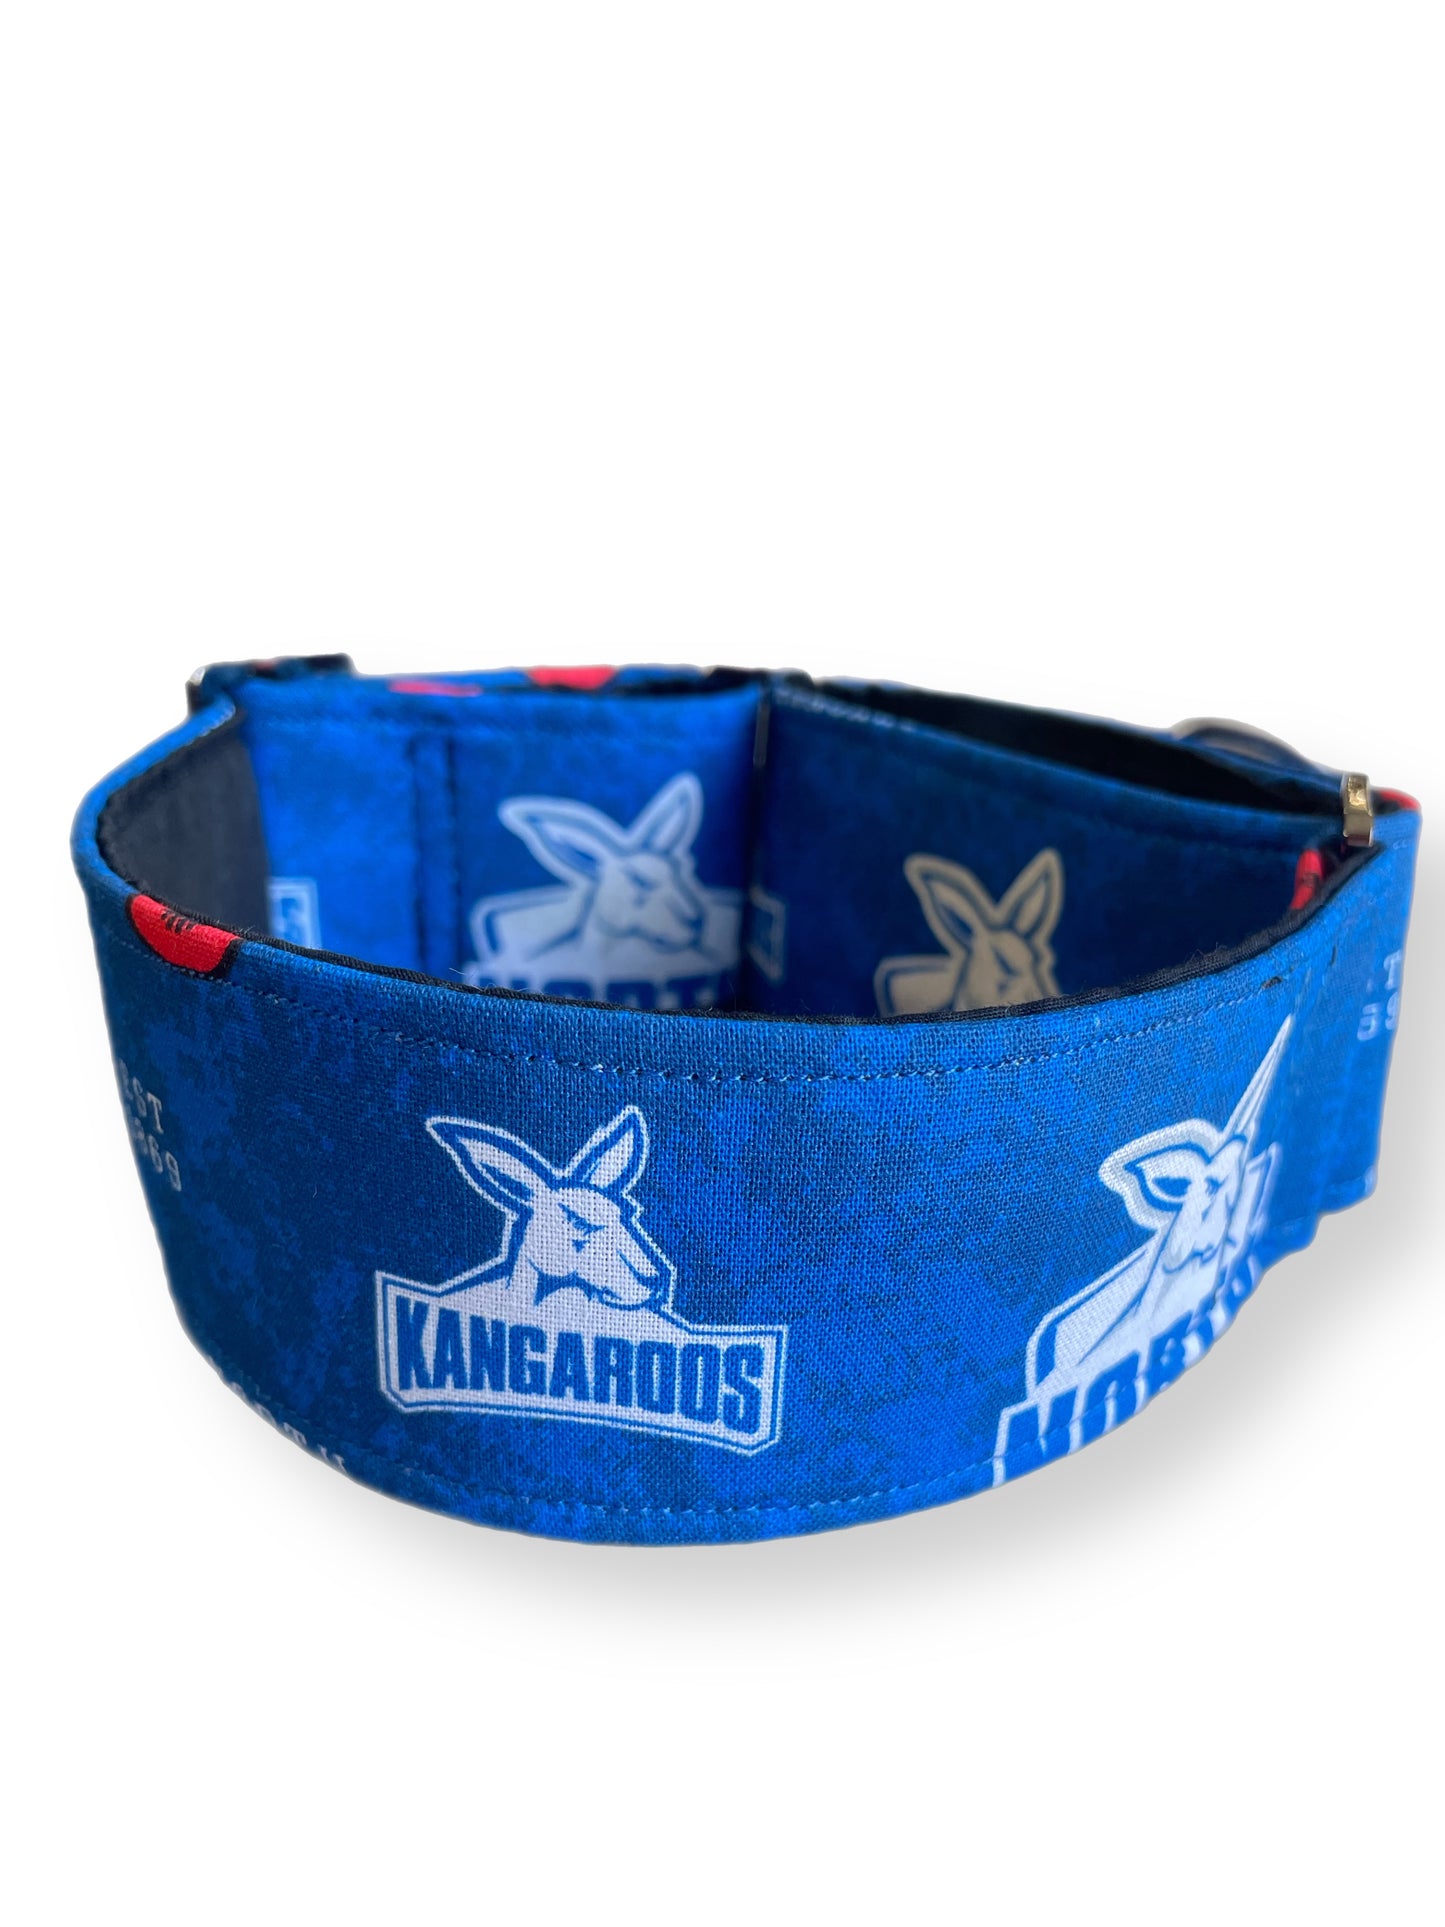 AFL inspired greyhound martingale 5cms wide collar cotton covered super soft